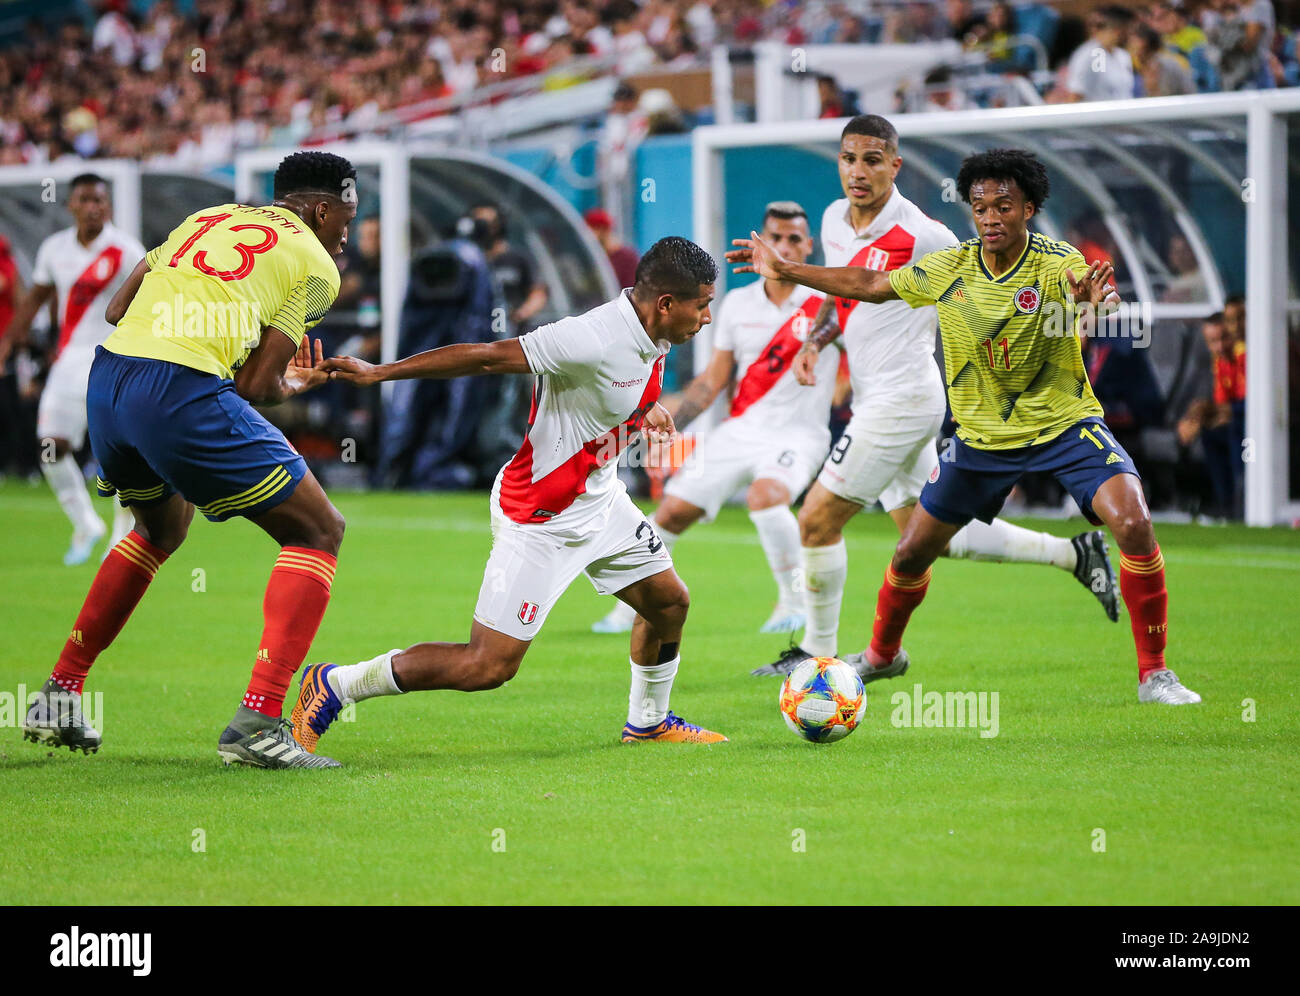 Miami Gardens, Florida, USA. 15th Nov, 2019. Peru midfielder Edison Flores (20) moves the ball challenged by Colombia midfielder Juan Cuadrados (11) and defender Yerry Mina (13) during a friendly soccer match at the Hard Rock Stadium in Miami Gardens, Florida. Credit: Mario Houben/ZUMA Wire/Alamy Live News Stock Photo